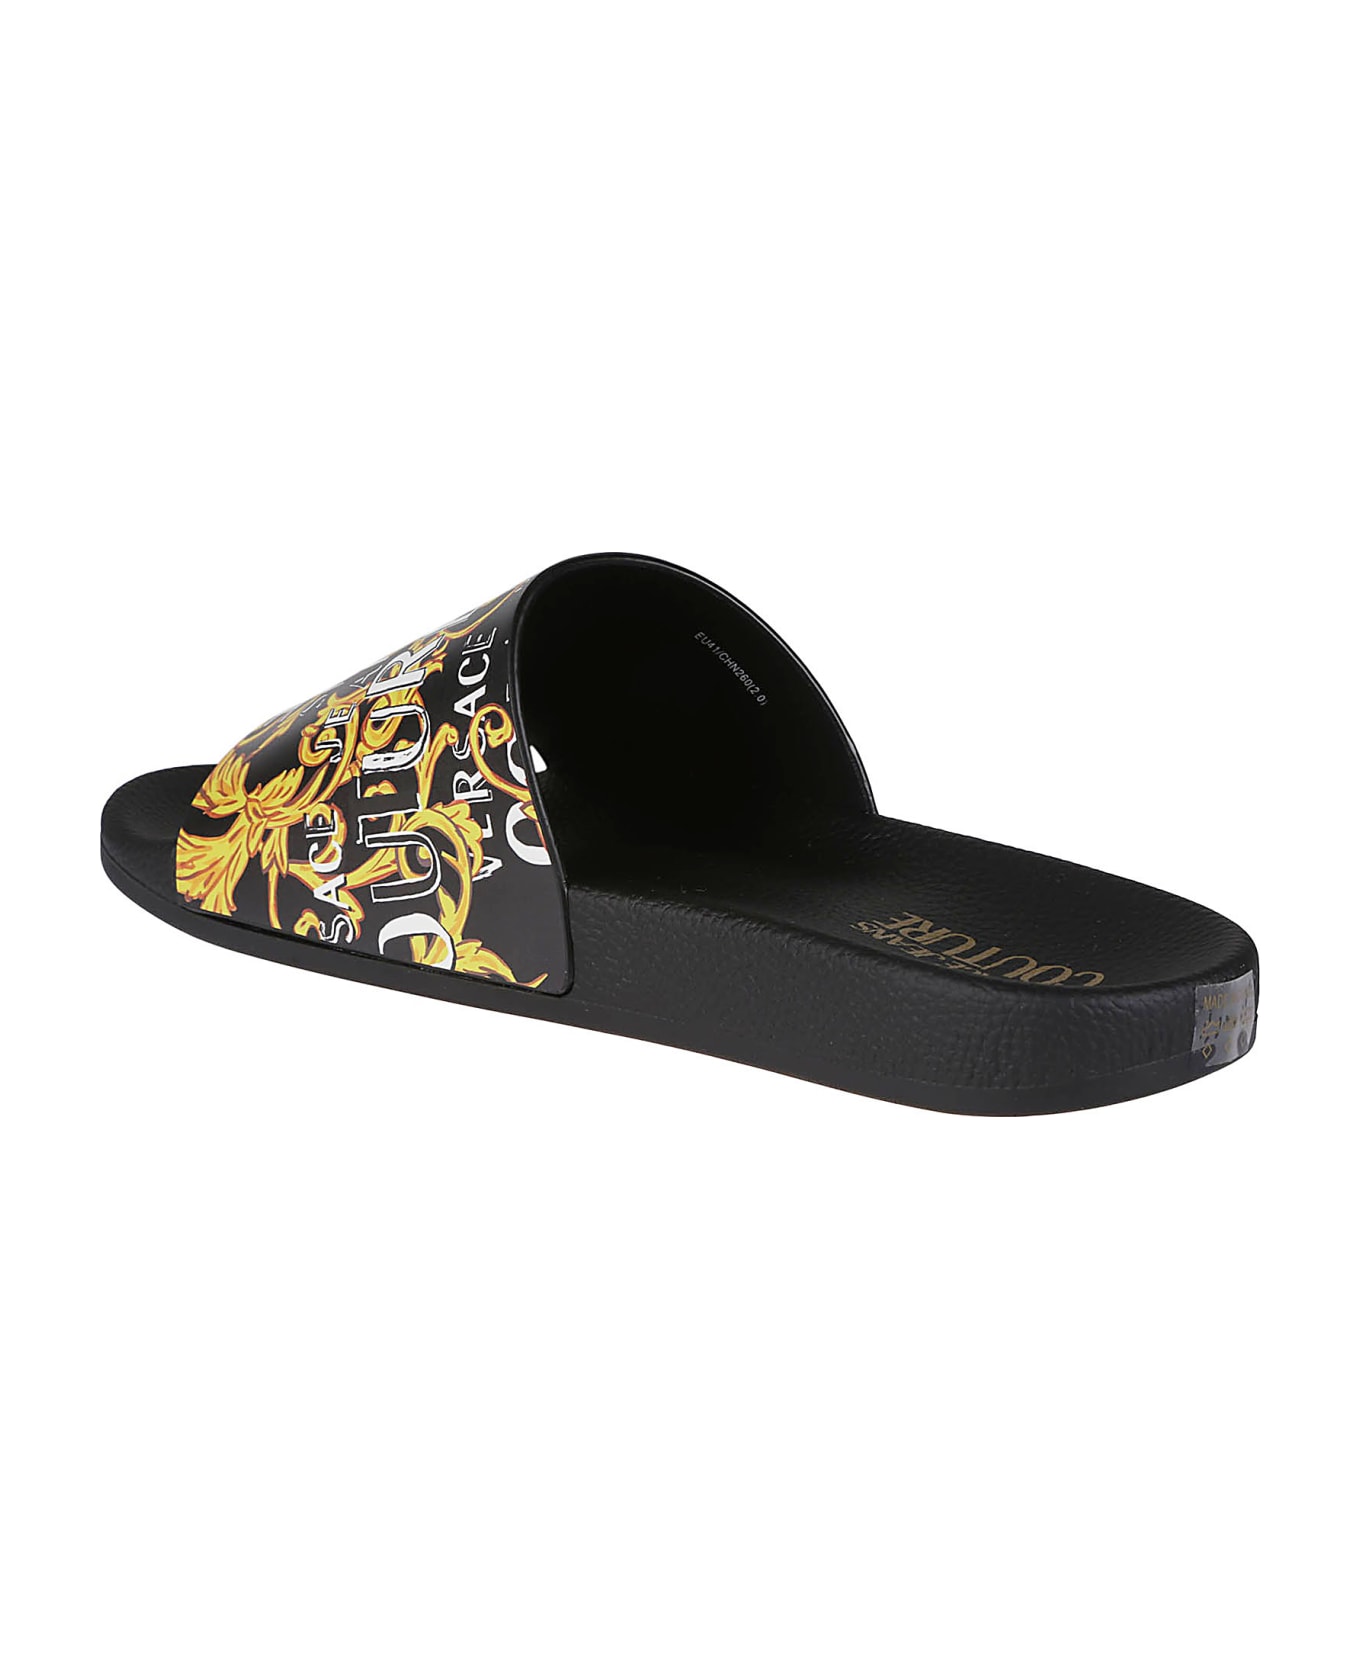 Versace Jeans Couture Gummy 38 Sliders - Black/gold その他各種シューズ